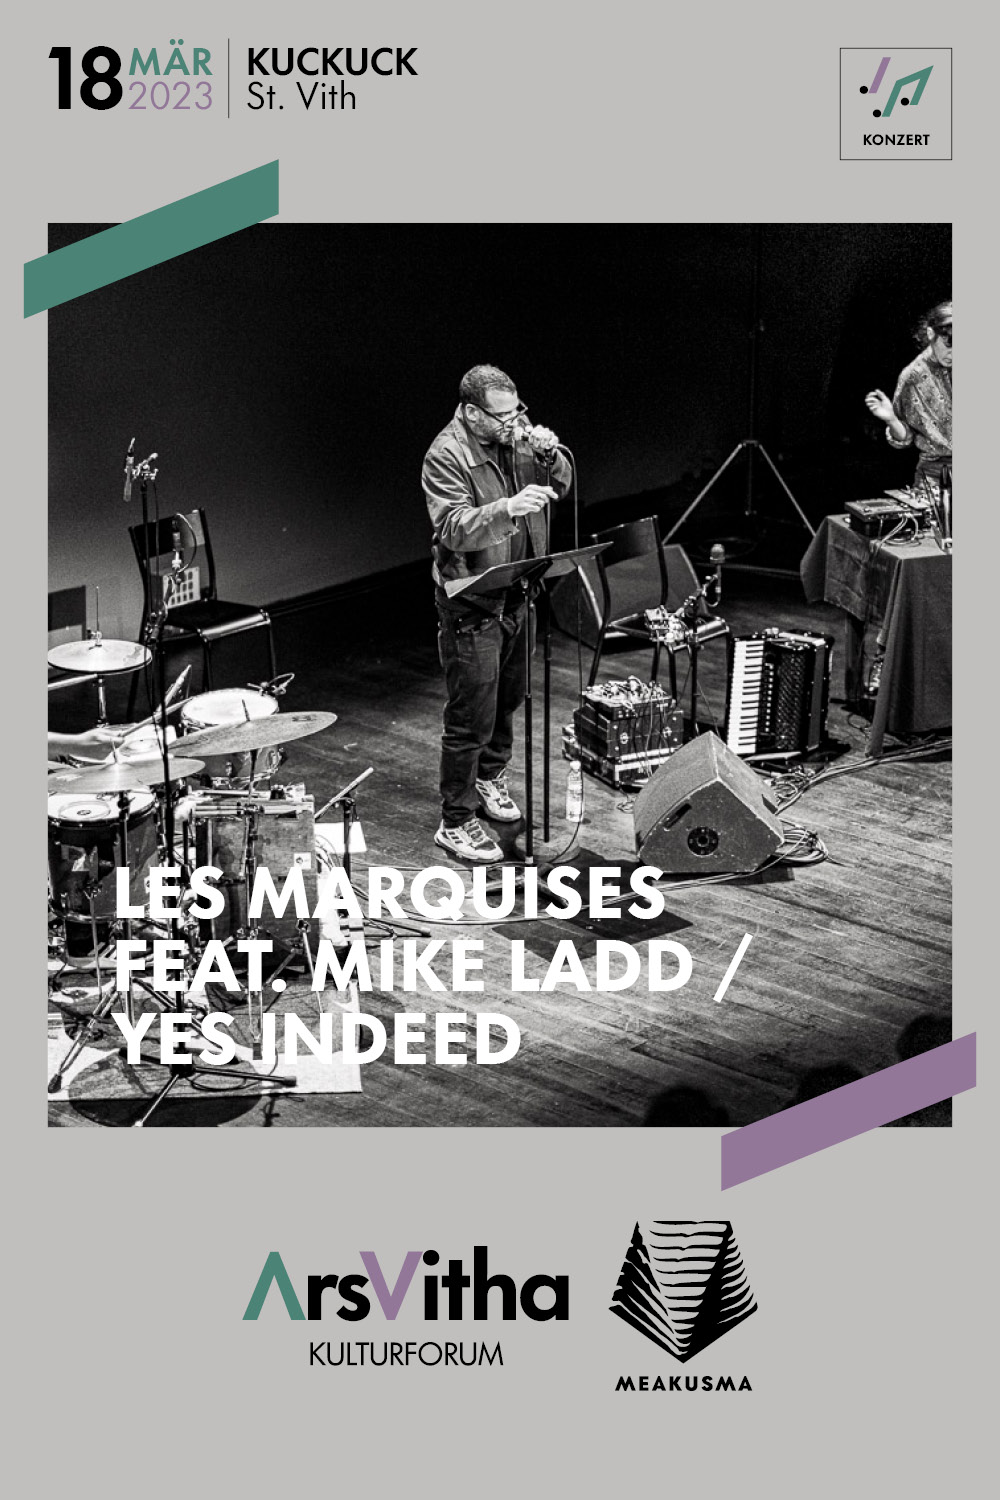 Les Marquises ft Mike Ladd / Yes Indeed